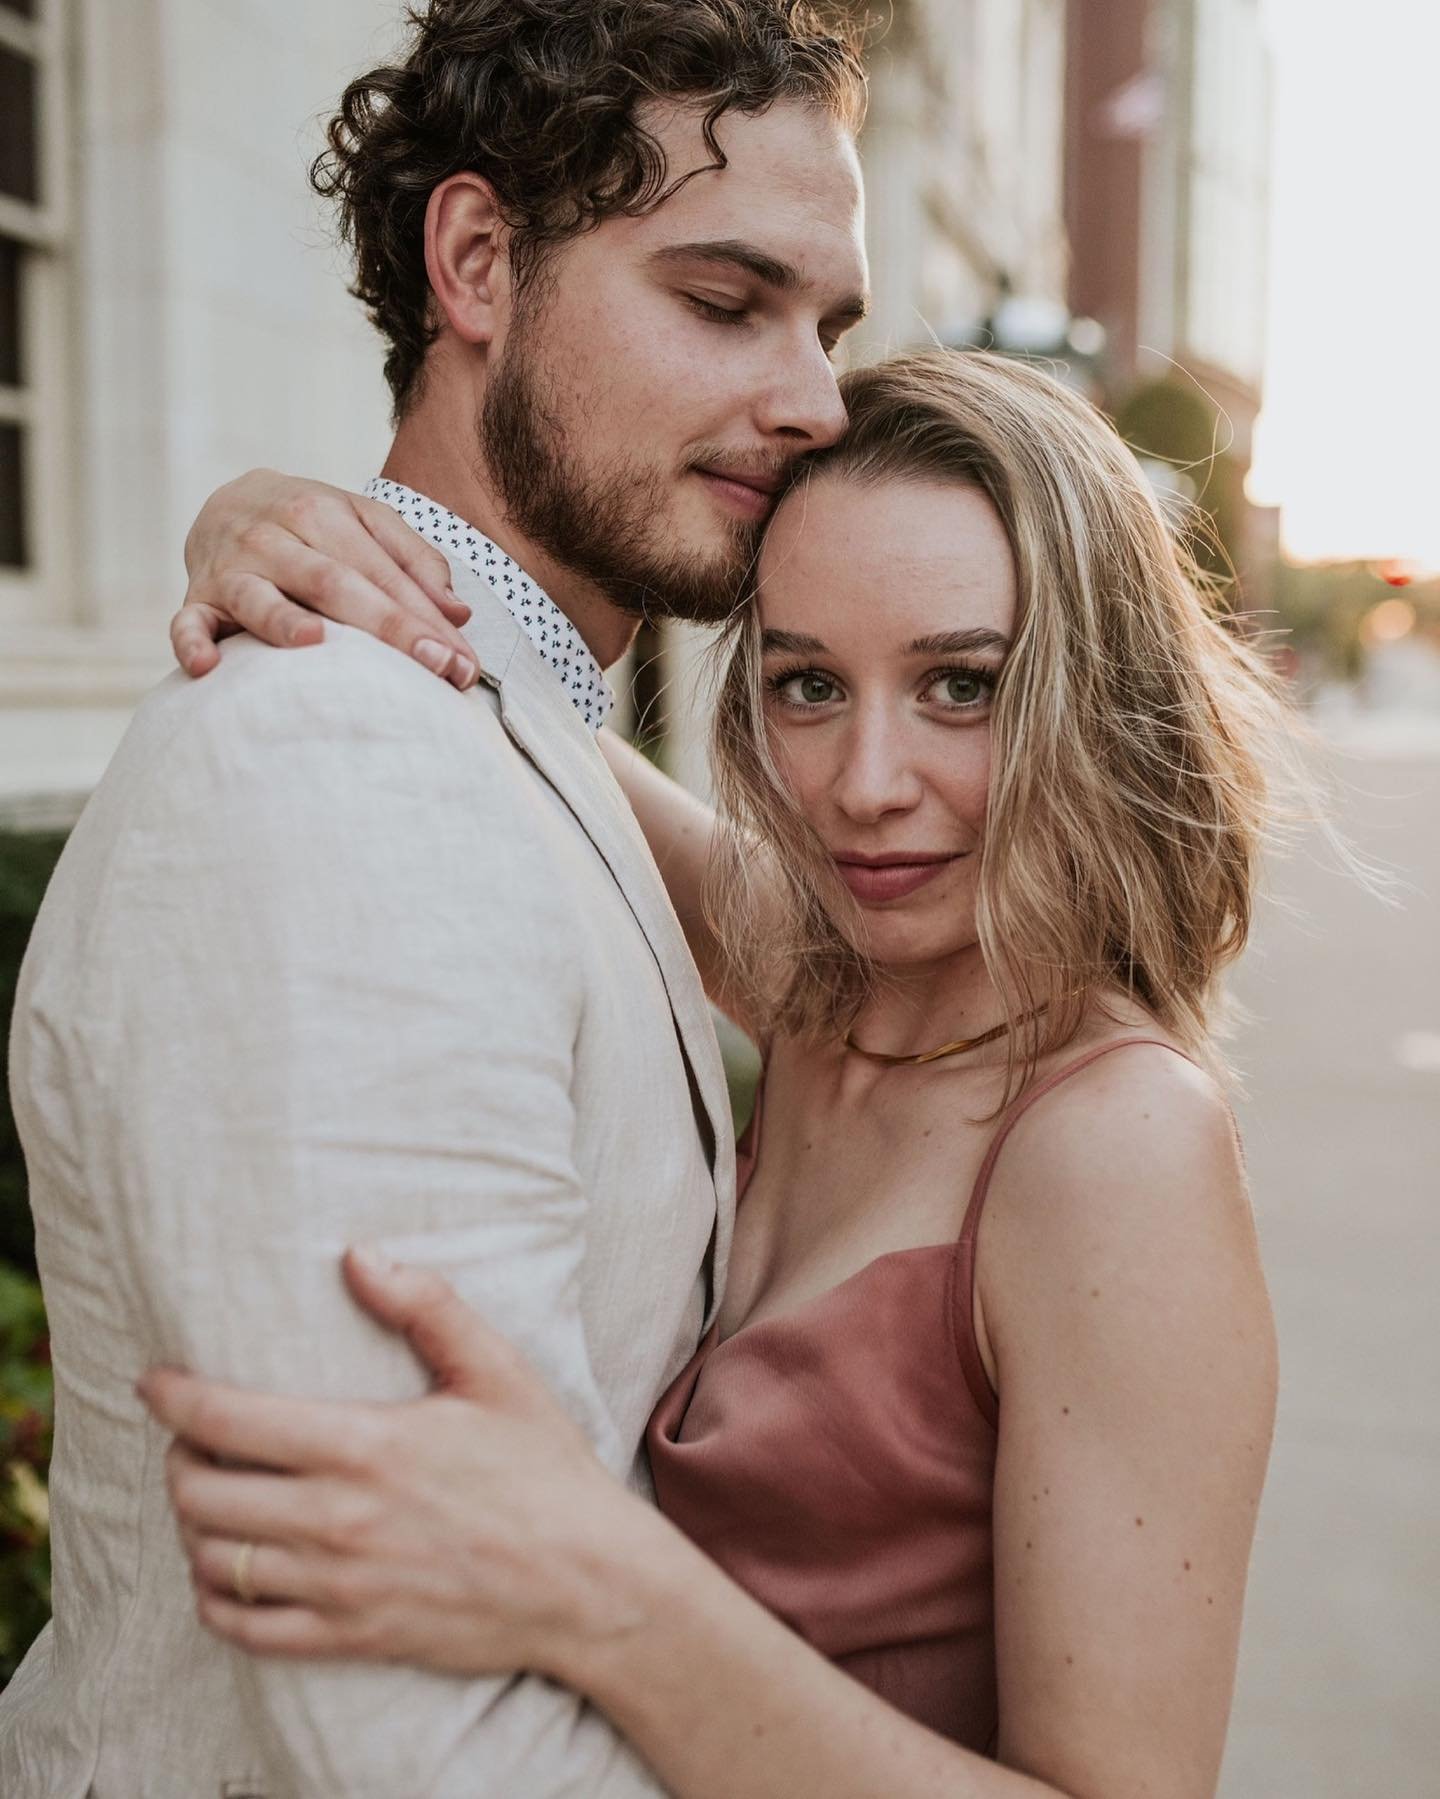 Forever using my friends for free modeling. It&rsquo;s helpful that every last one of them is good looking
&bull;
&bull;
&bull;
#photo #photographer #photography #engagement #engagementphotography #engagementphotographer #kansascityengagementphotogra